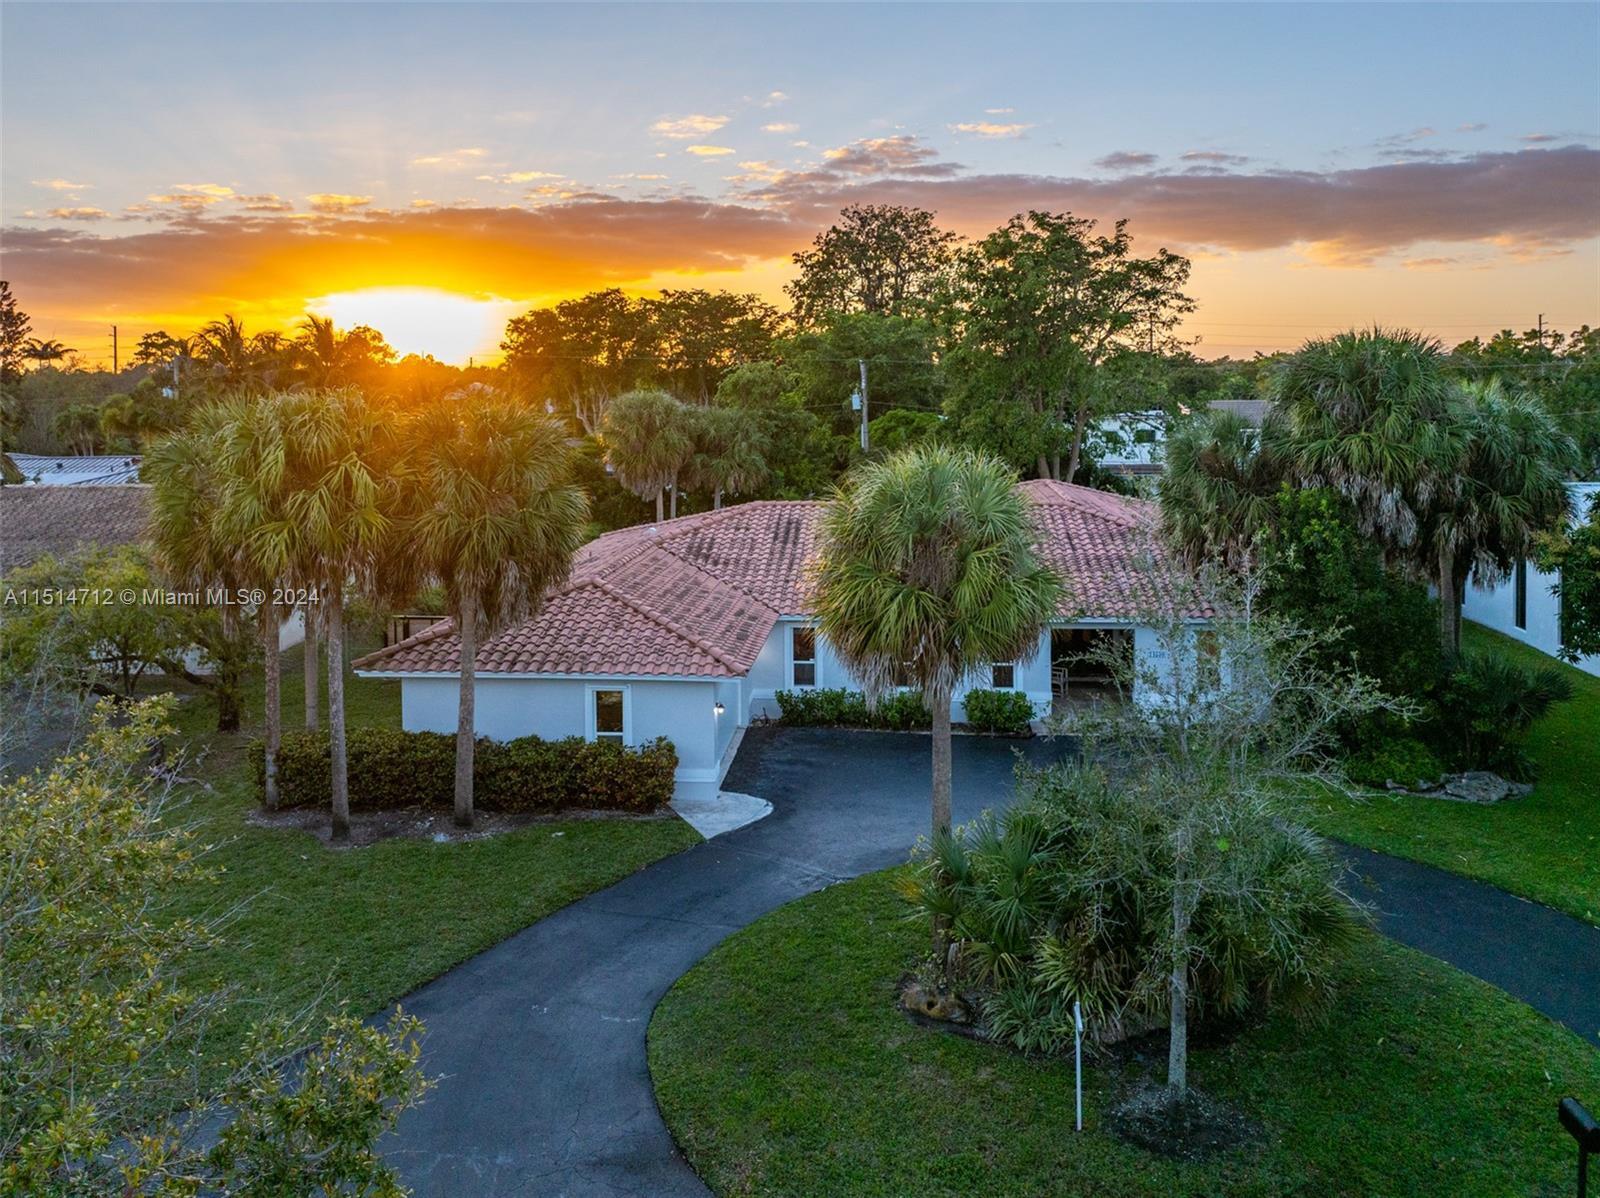 Rare gem available in the coveted guard gated S. Gables Kings Bay community. This warm and inviting 